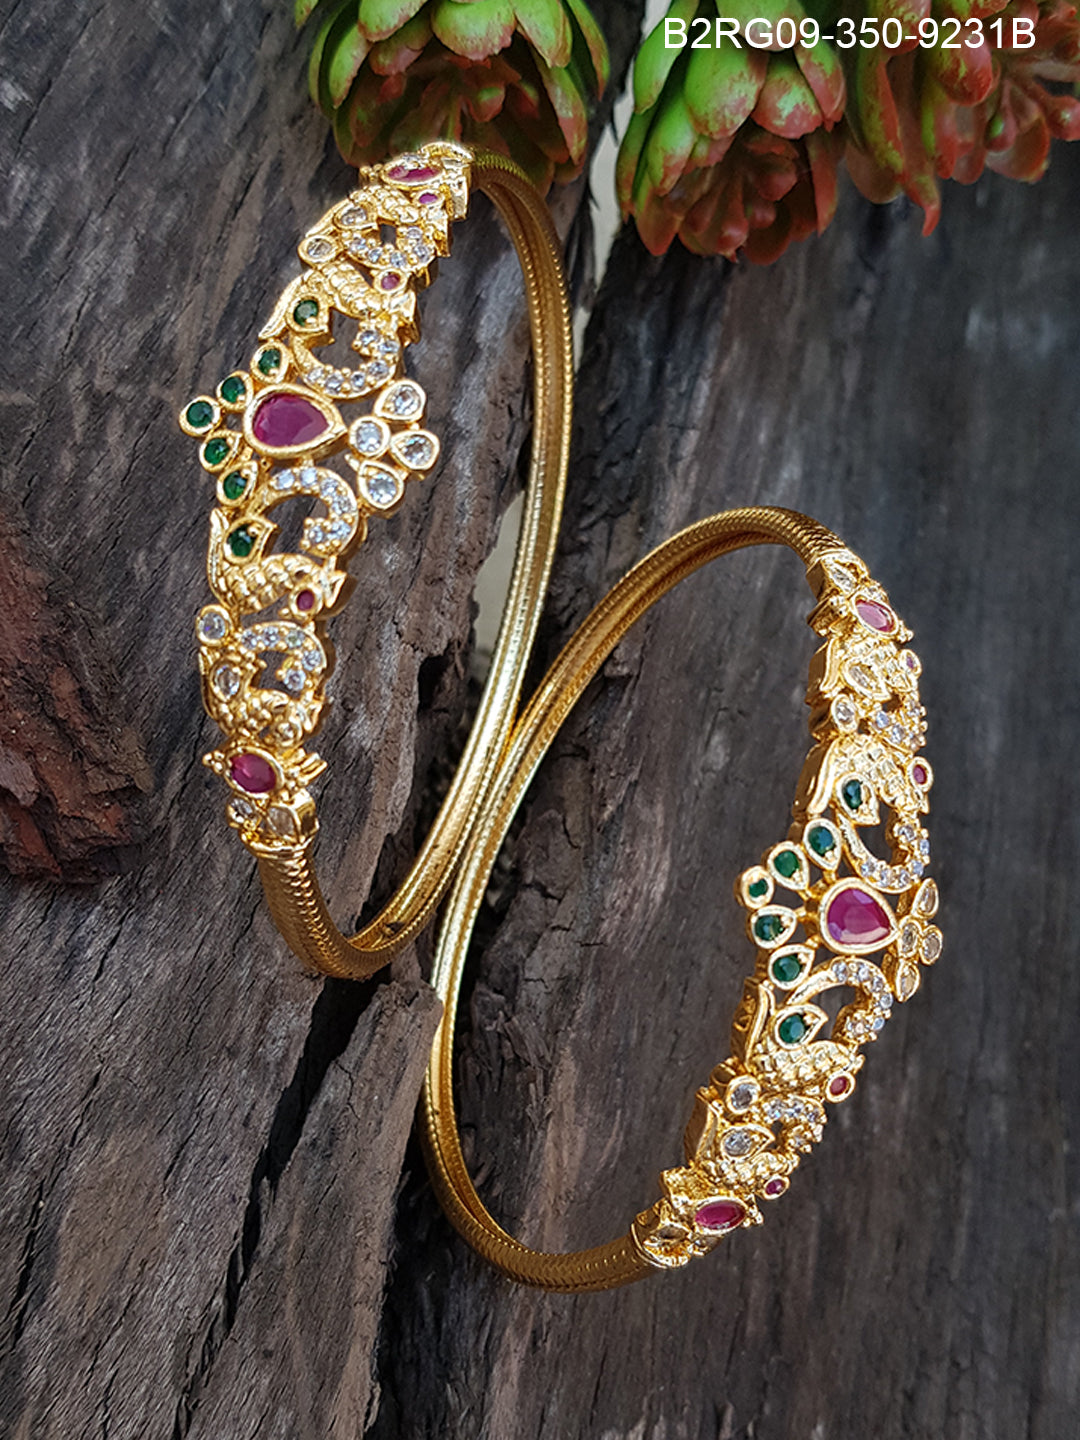 Premium Micro Gold Plated Set of 2 Temple Bangles 9230A